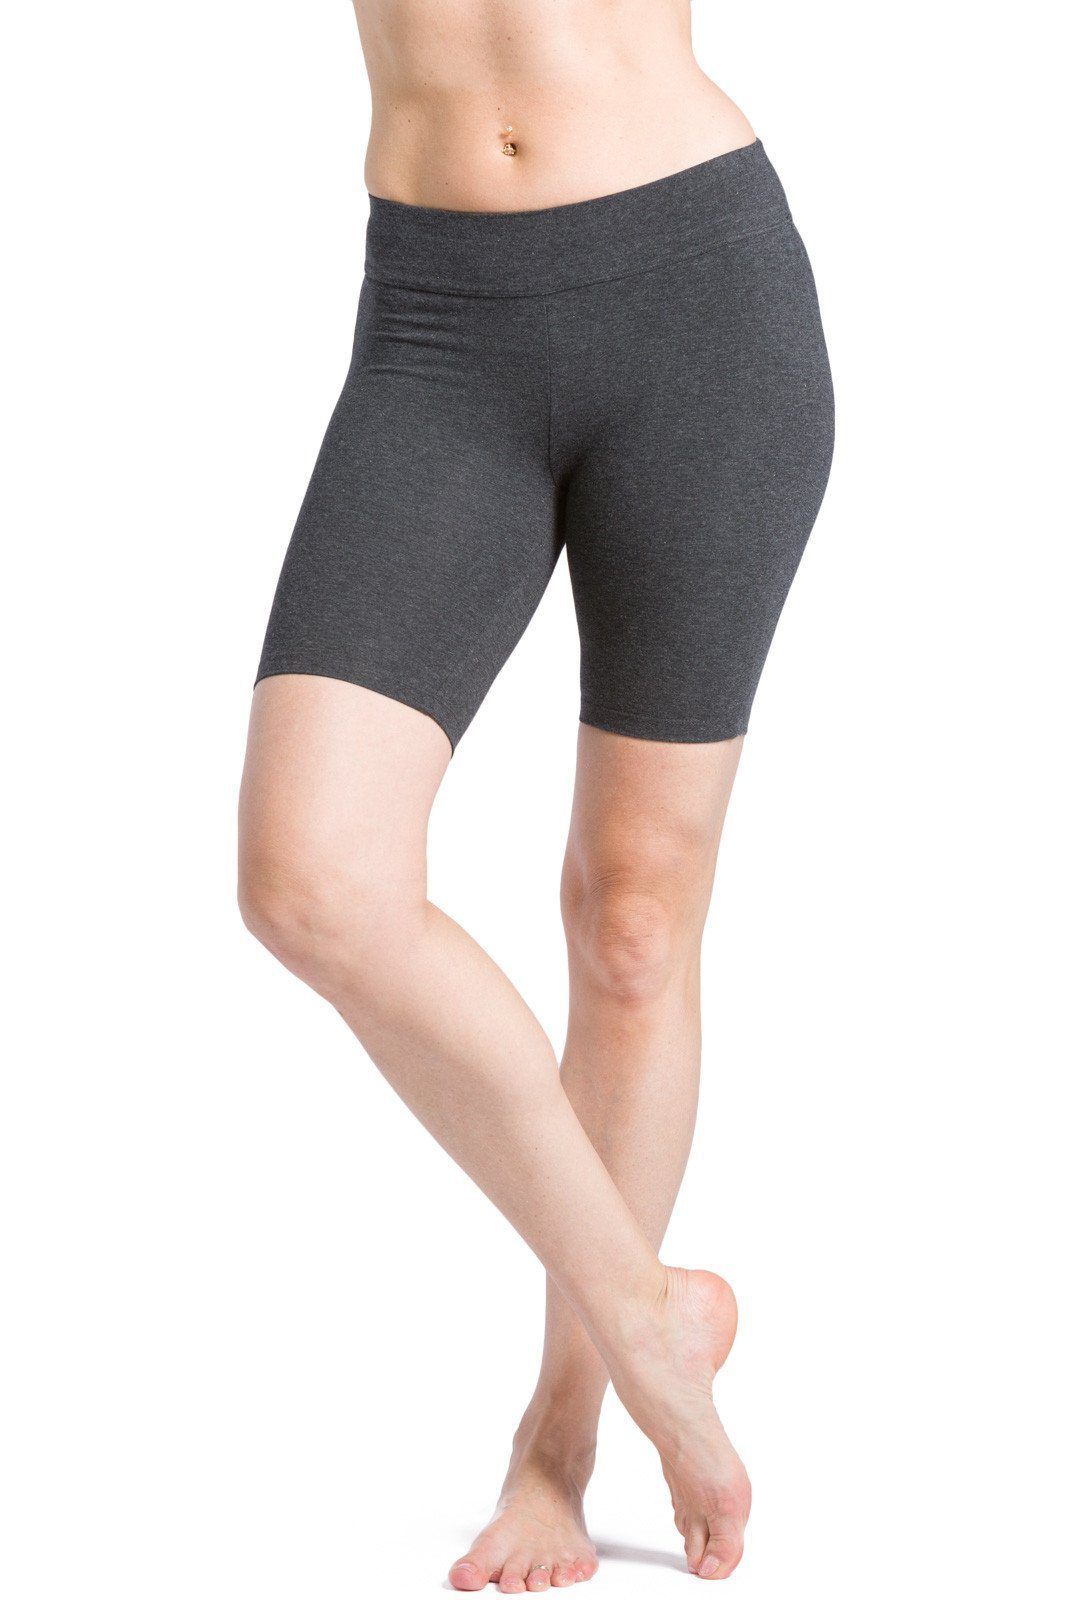 Women's Leggings | Mid Thigh Yoga Active wear Tights | Fishers Finery